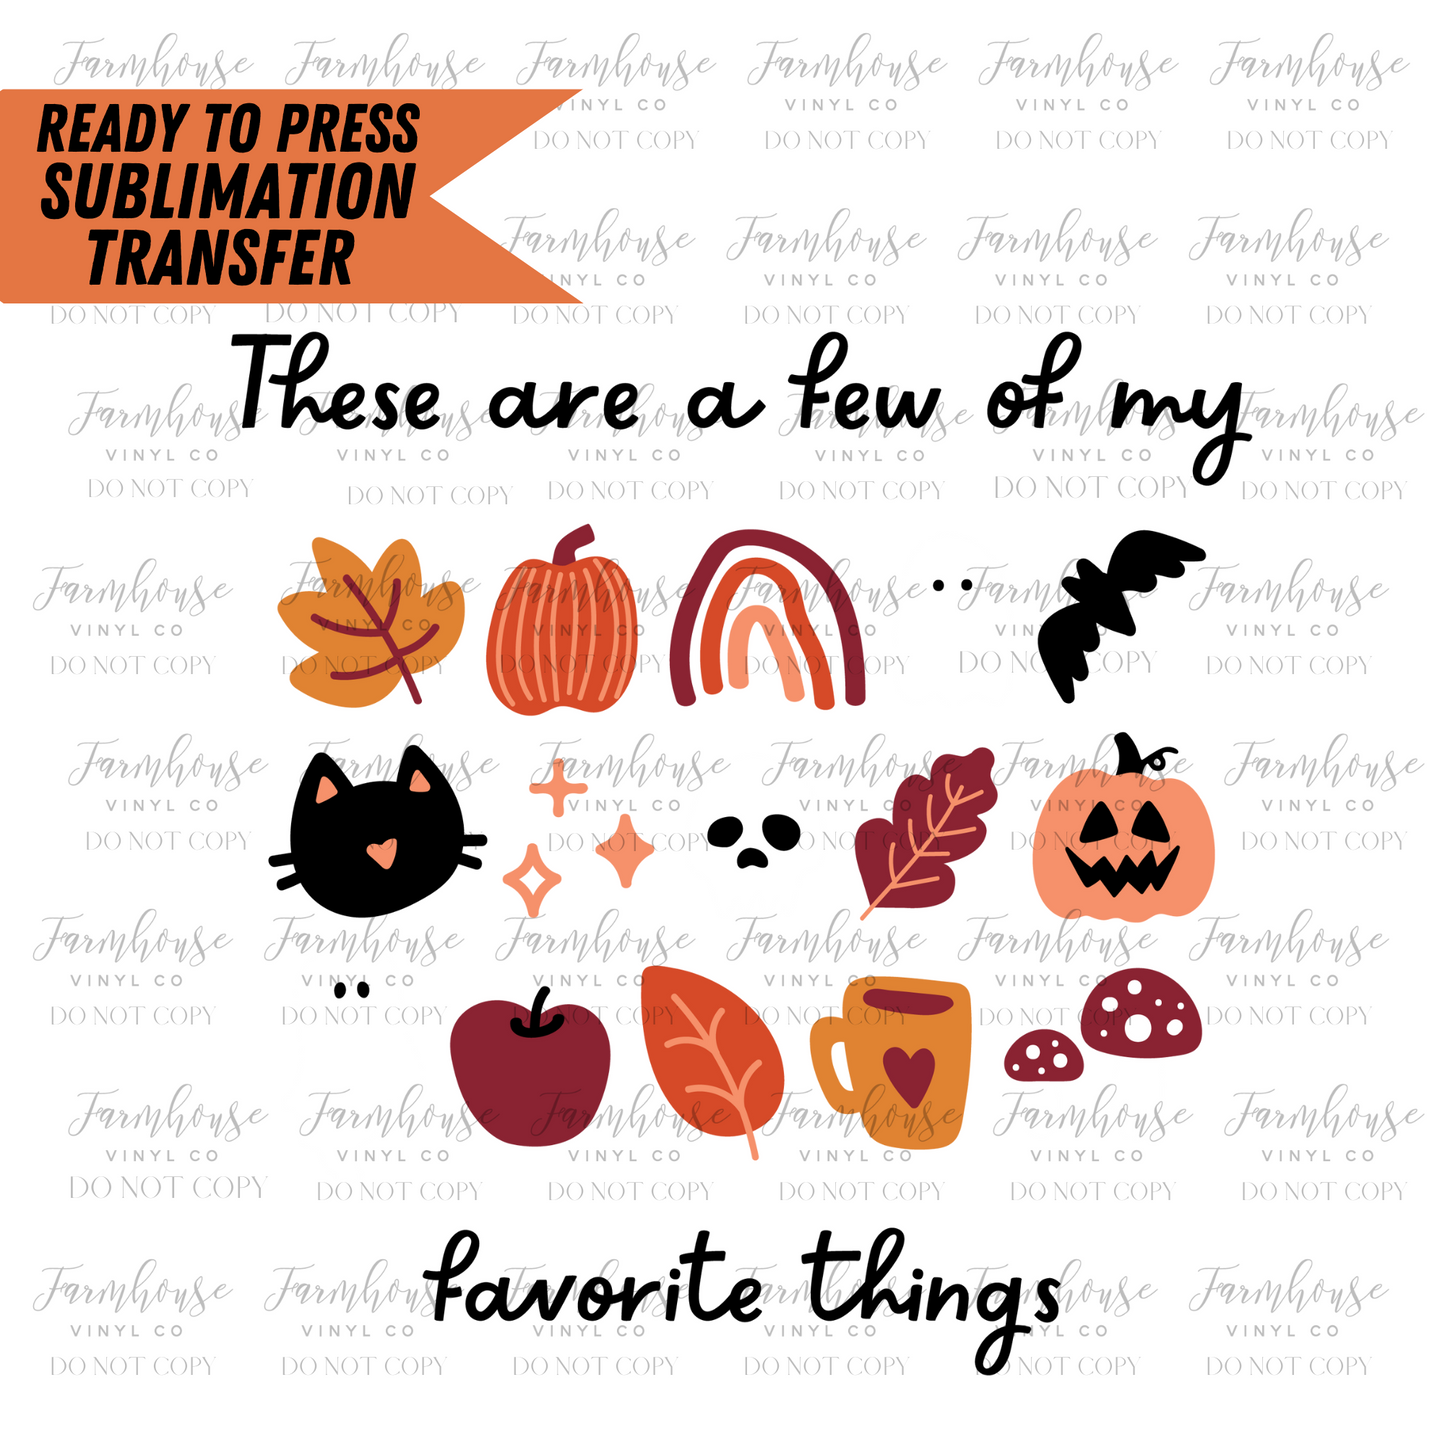 These are a few of my Favorite Things Fall Ready to Press Sublimation Transfer - Farmhouse Vinyl Co